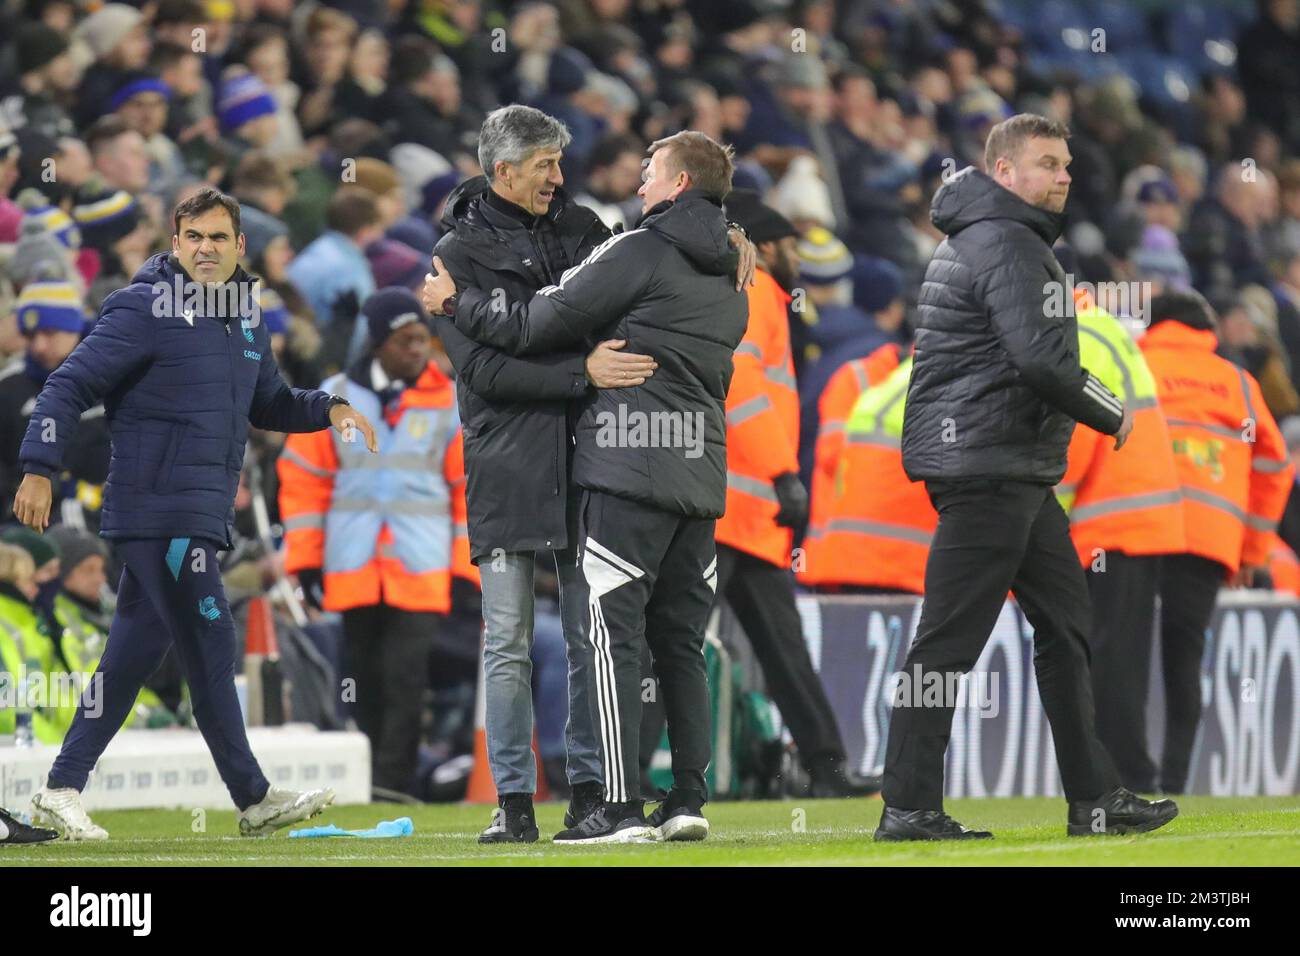 Jesse Marsch manager of Leeds United and Imanol Alguacil manger of Real Sociedad embrace after the final whistle in the Mid season friendly match Leeds United vs Real Sociedad at Elland Road, Leeds, United Kingdom, 16th December 2022  (Photo by James Heaton/News Images) Stock Photo